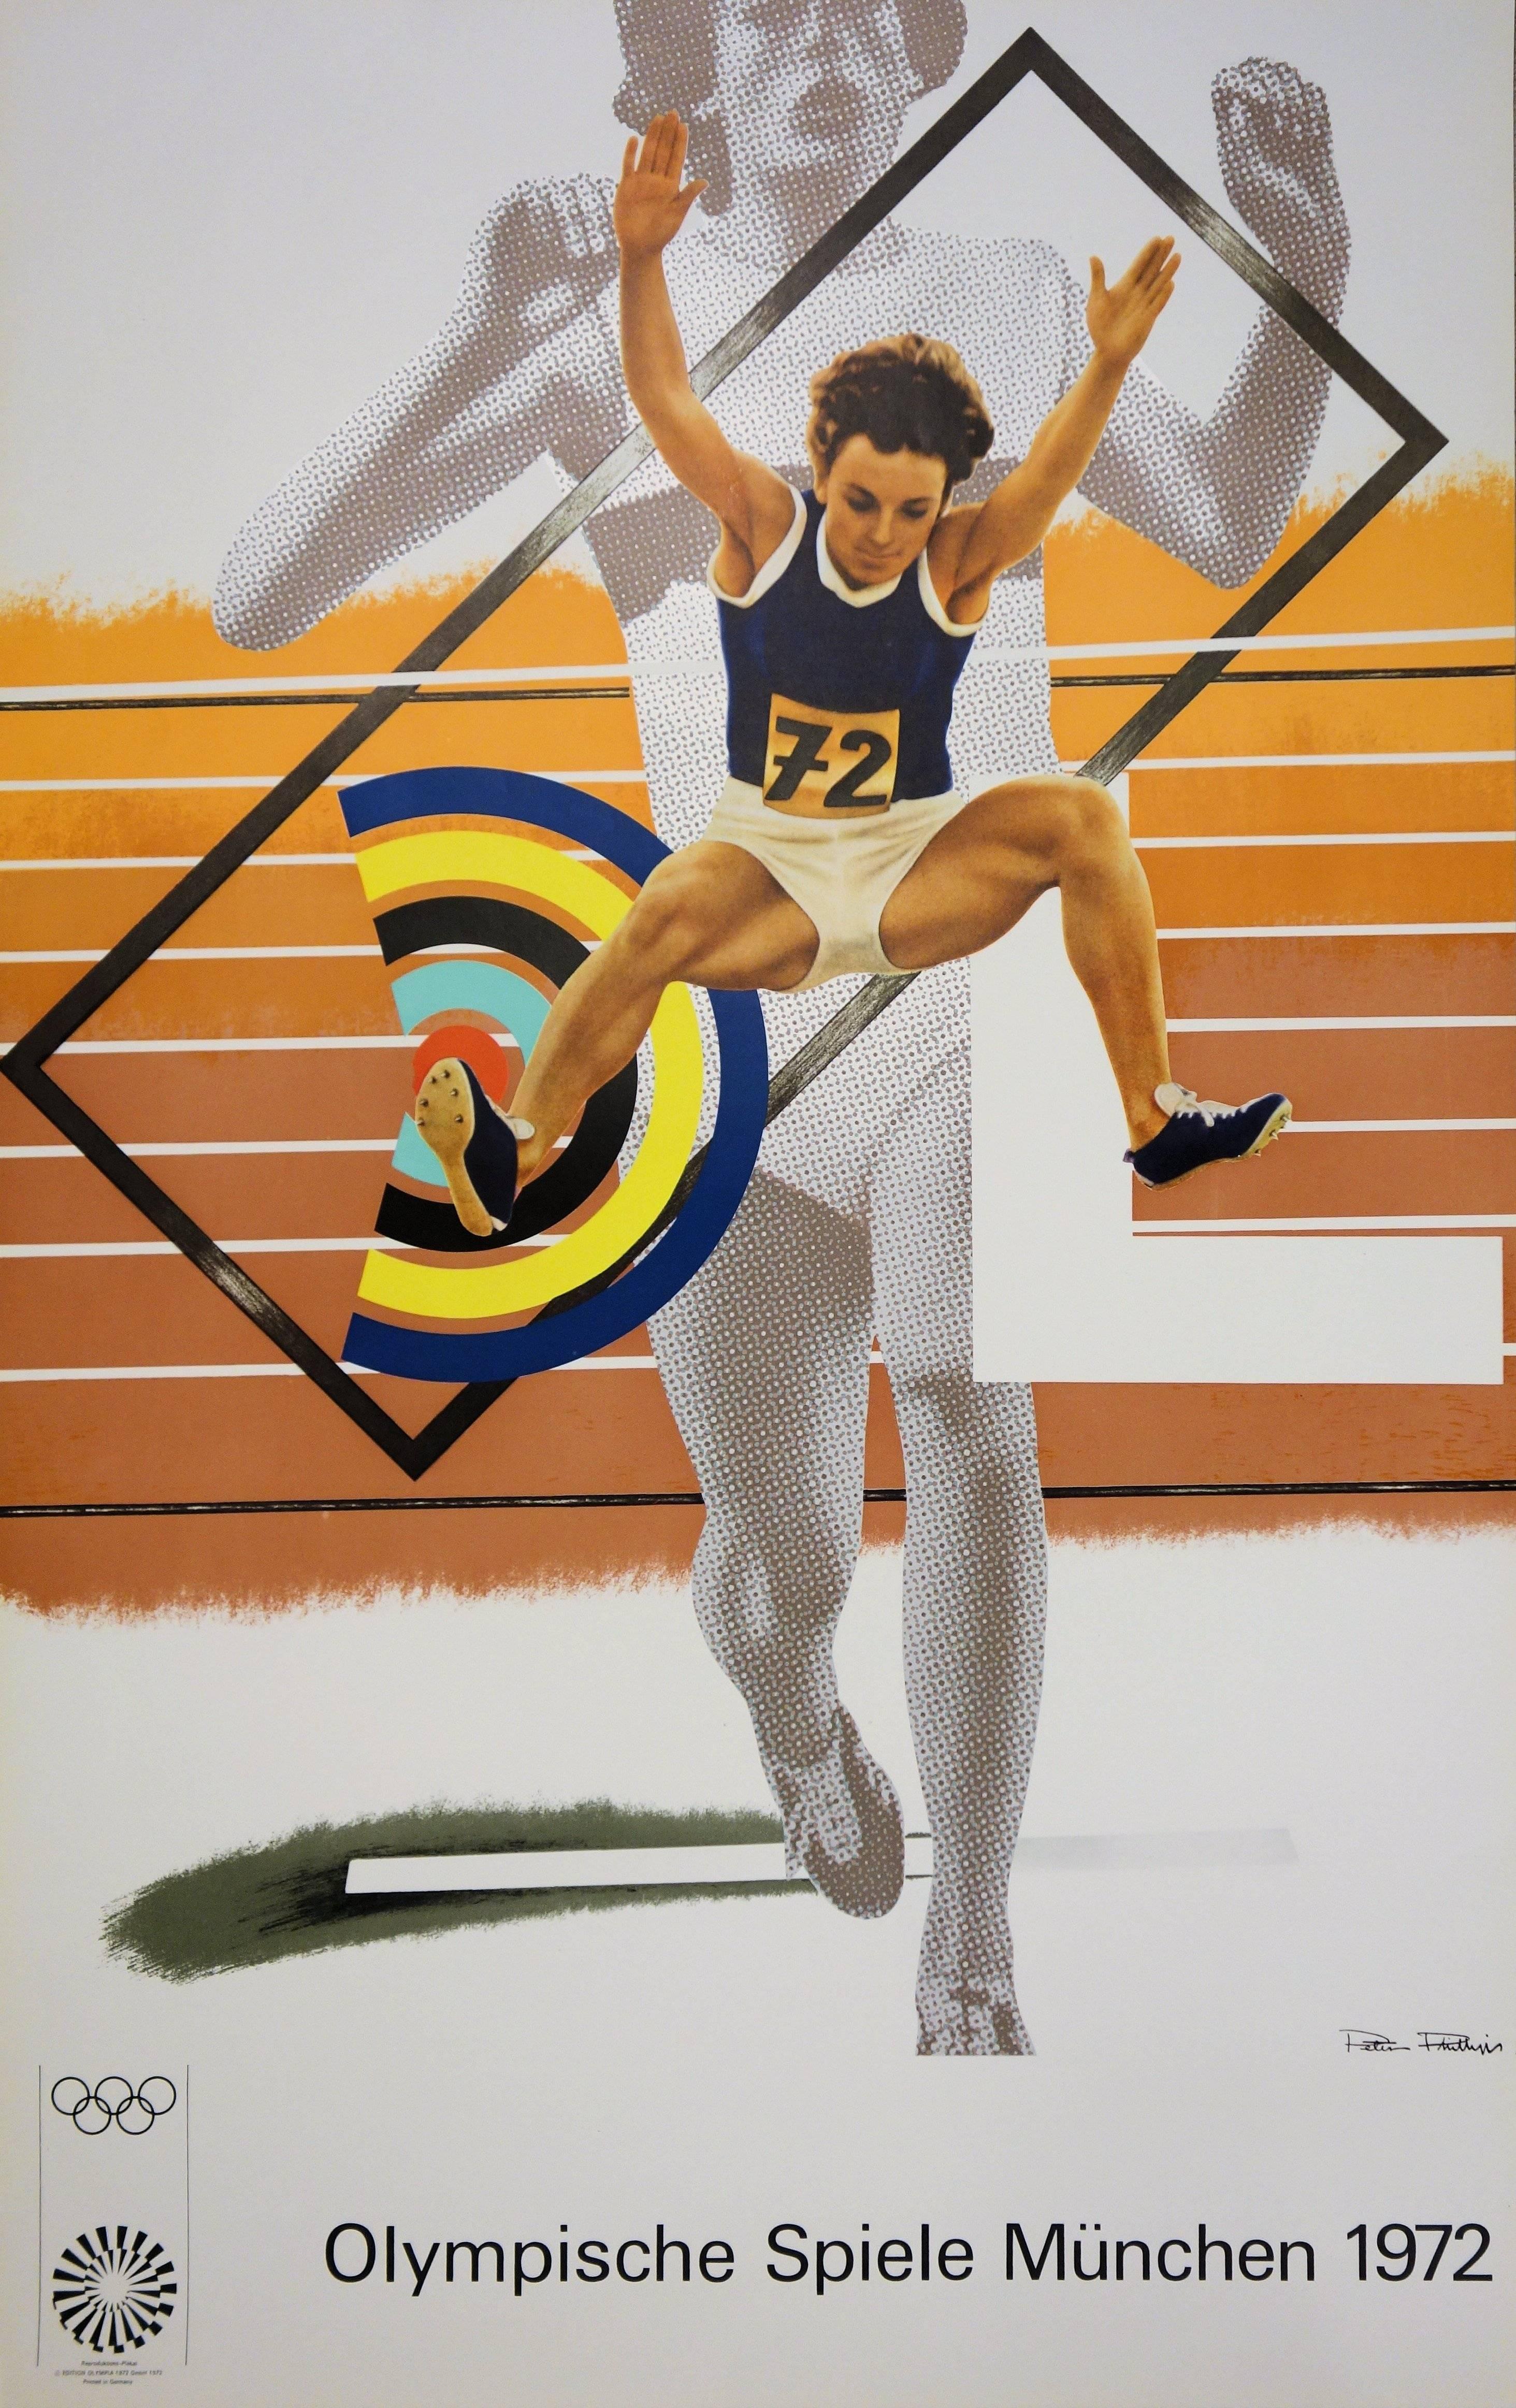 Athletism : Higher, Stronger, Further - Lithograph (Olympic Games Munich 1972)